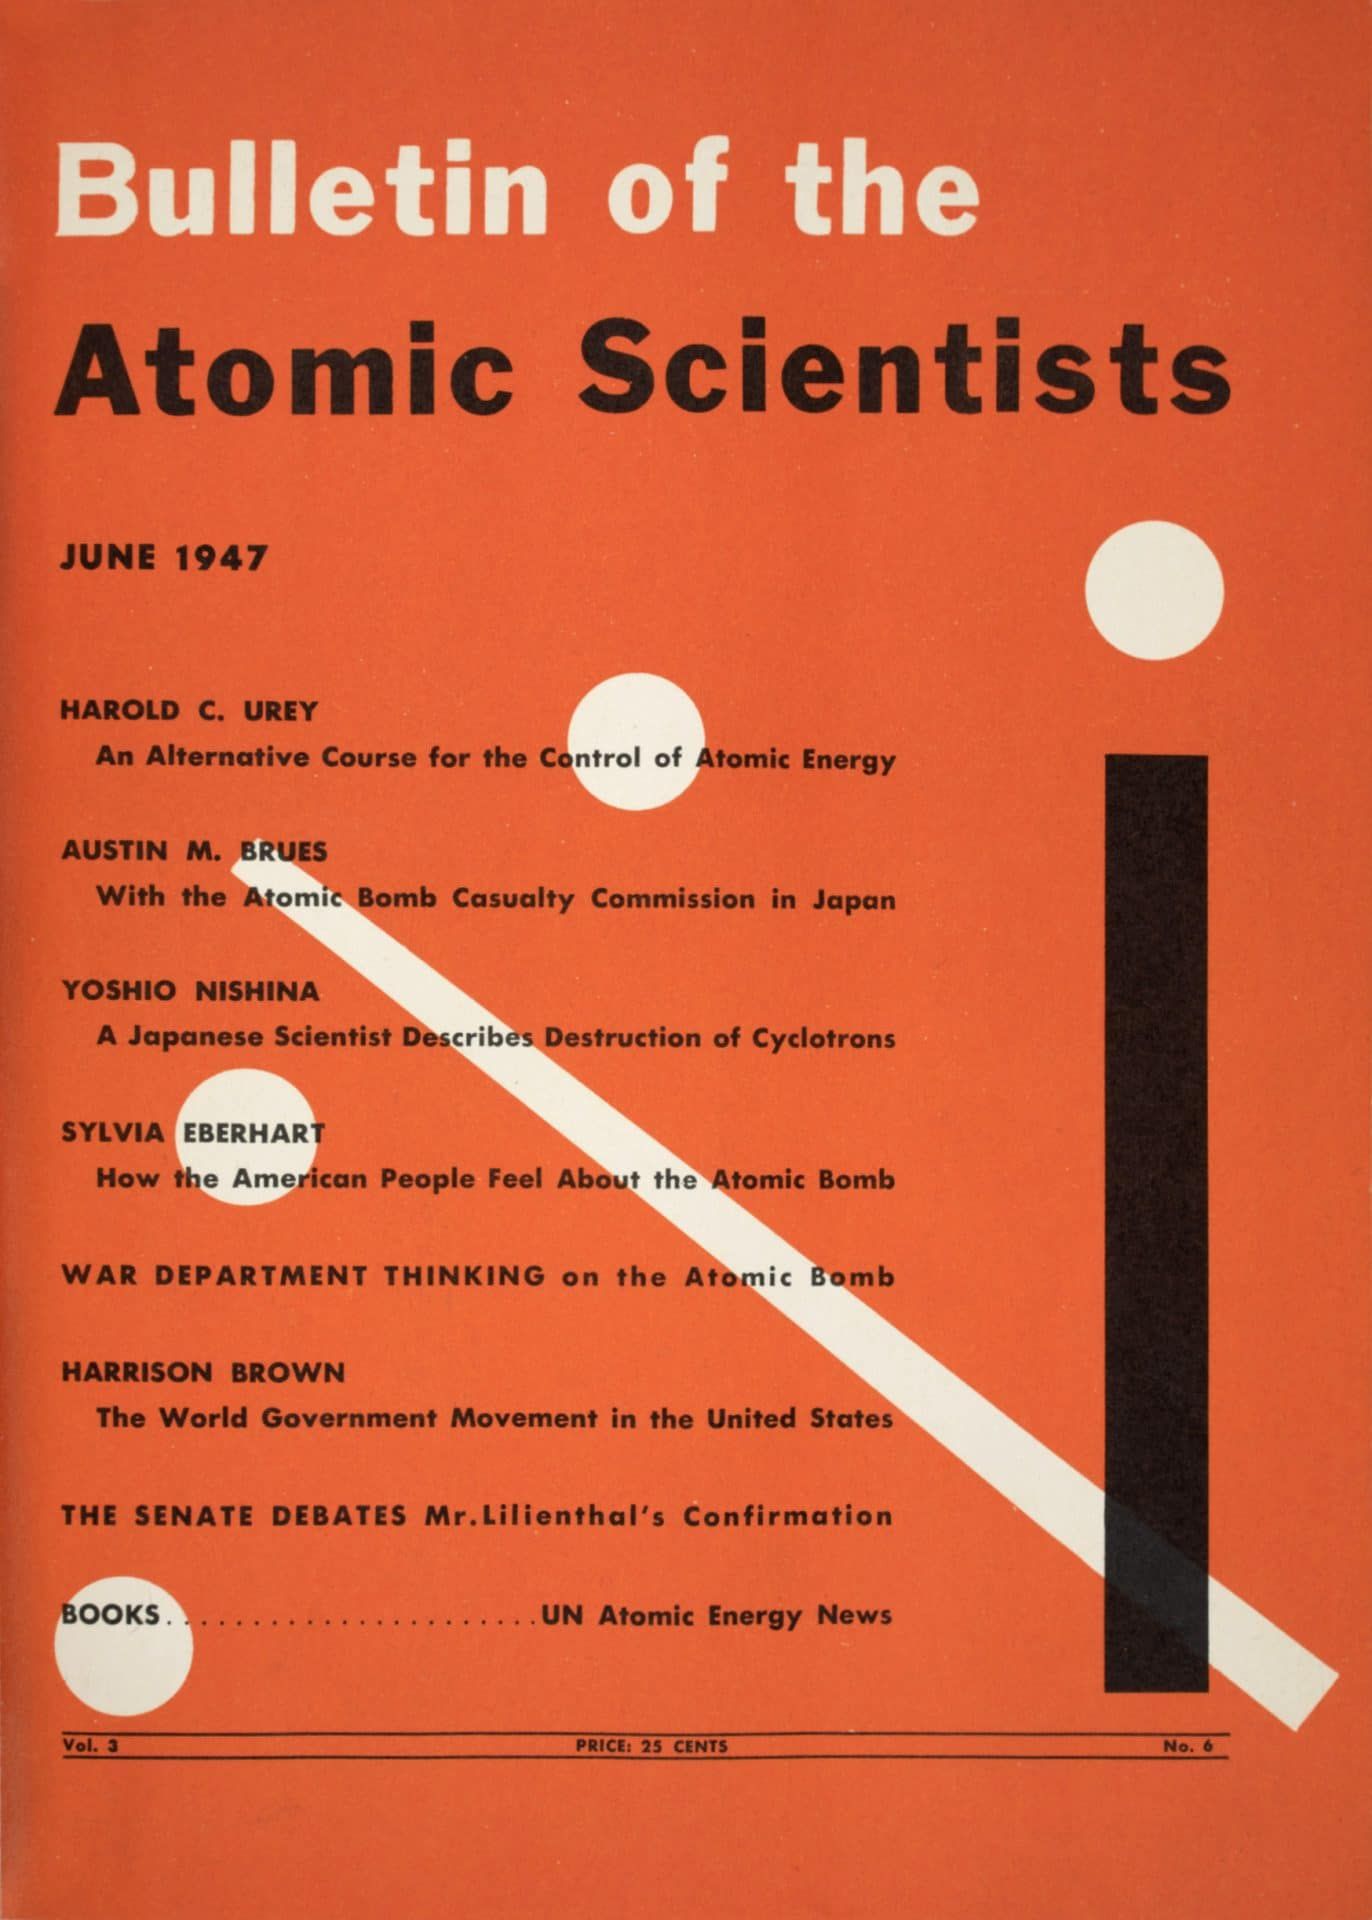 The Bulletin becomes a full-fledged magazine in 1947